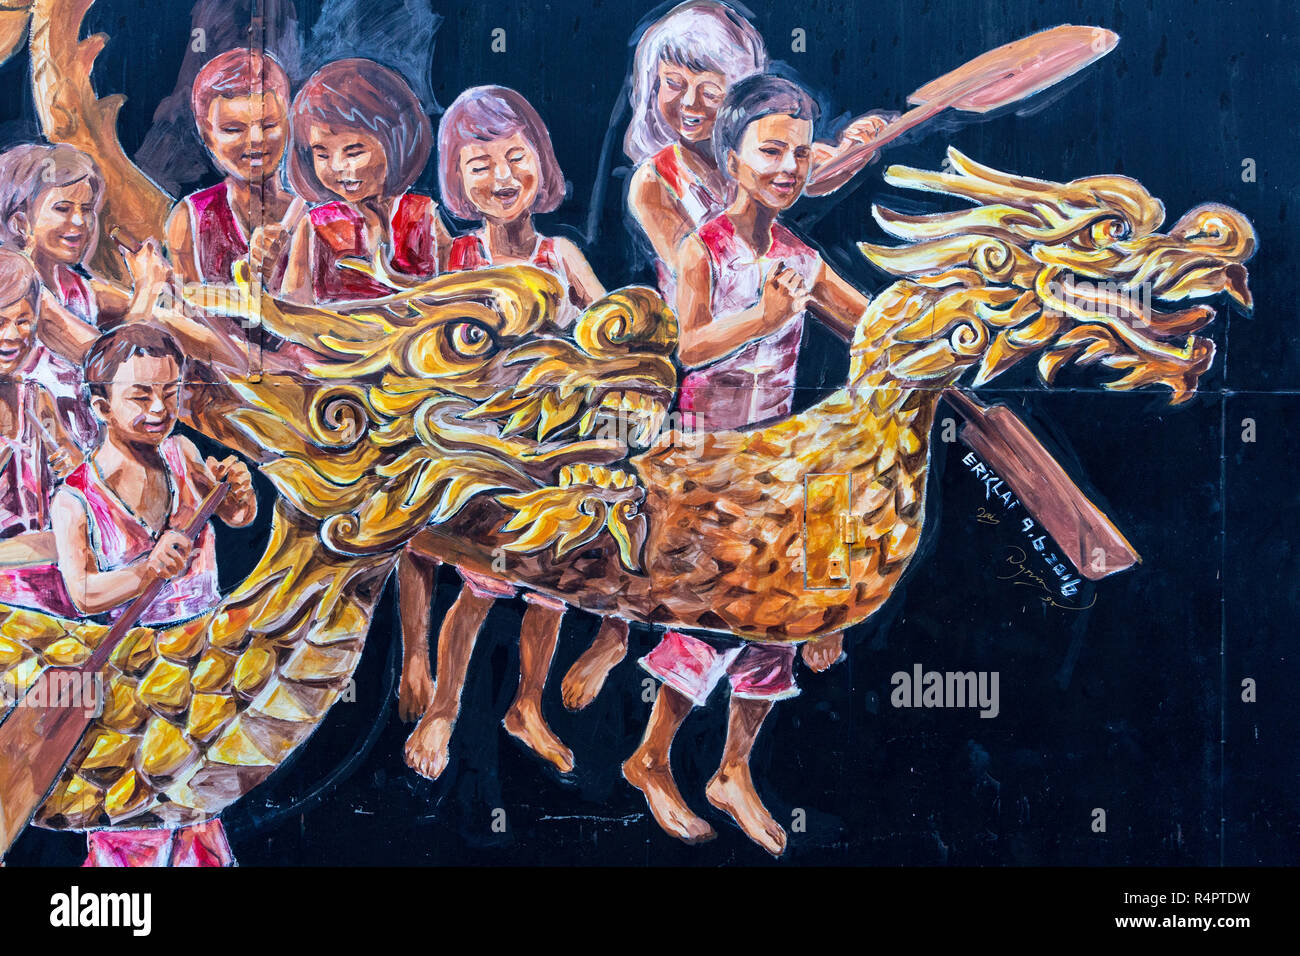 Wall Mural by Erik Lai Showing Young Children, Ipoh, Malaysia. Stock Photo